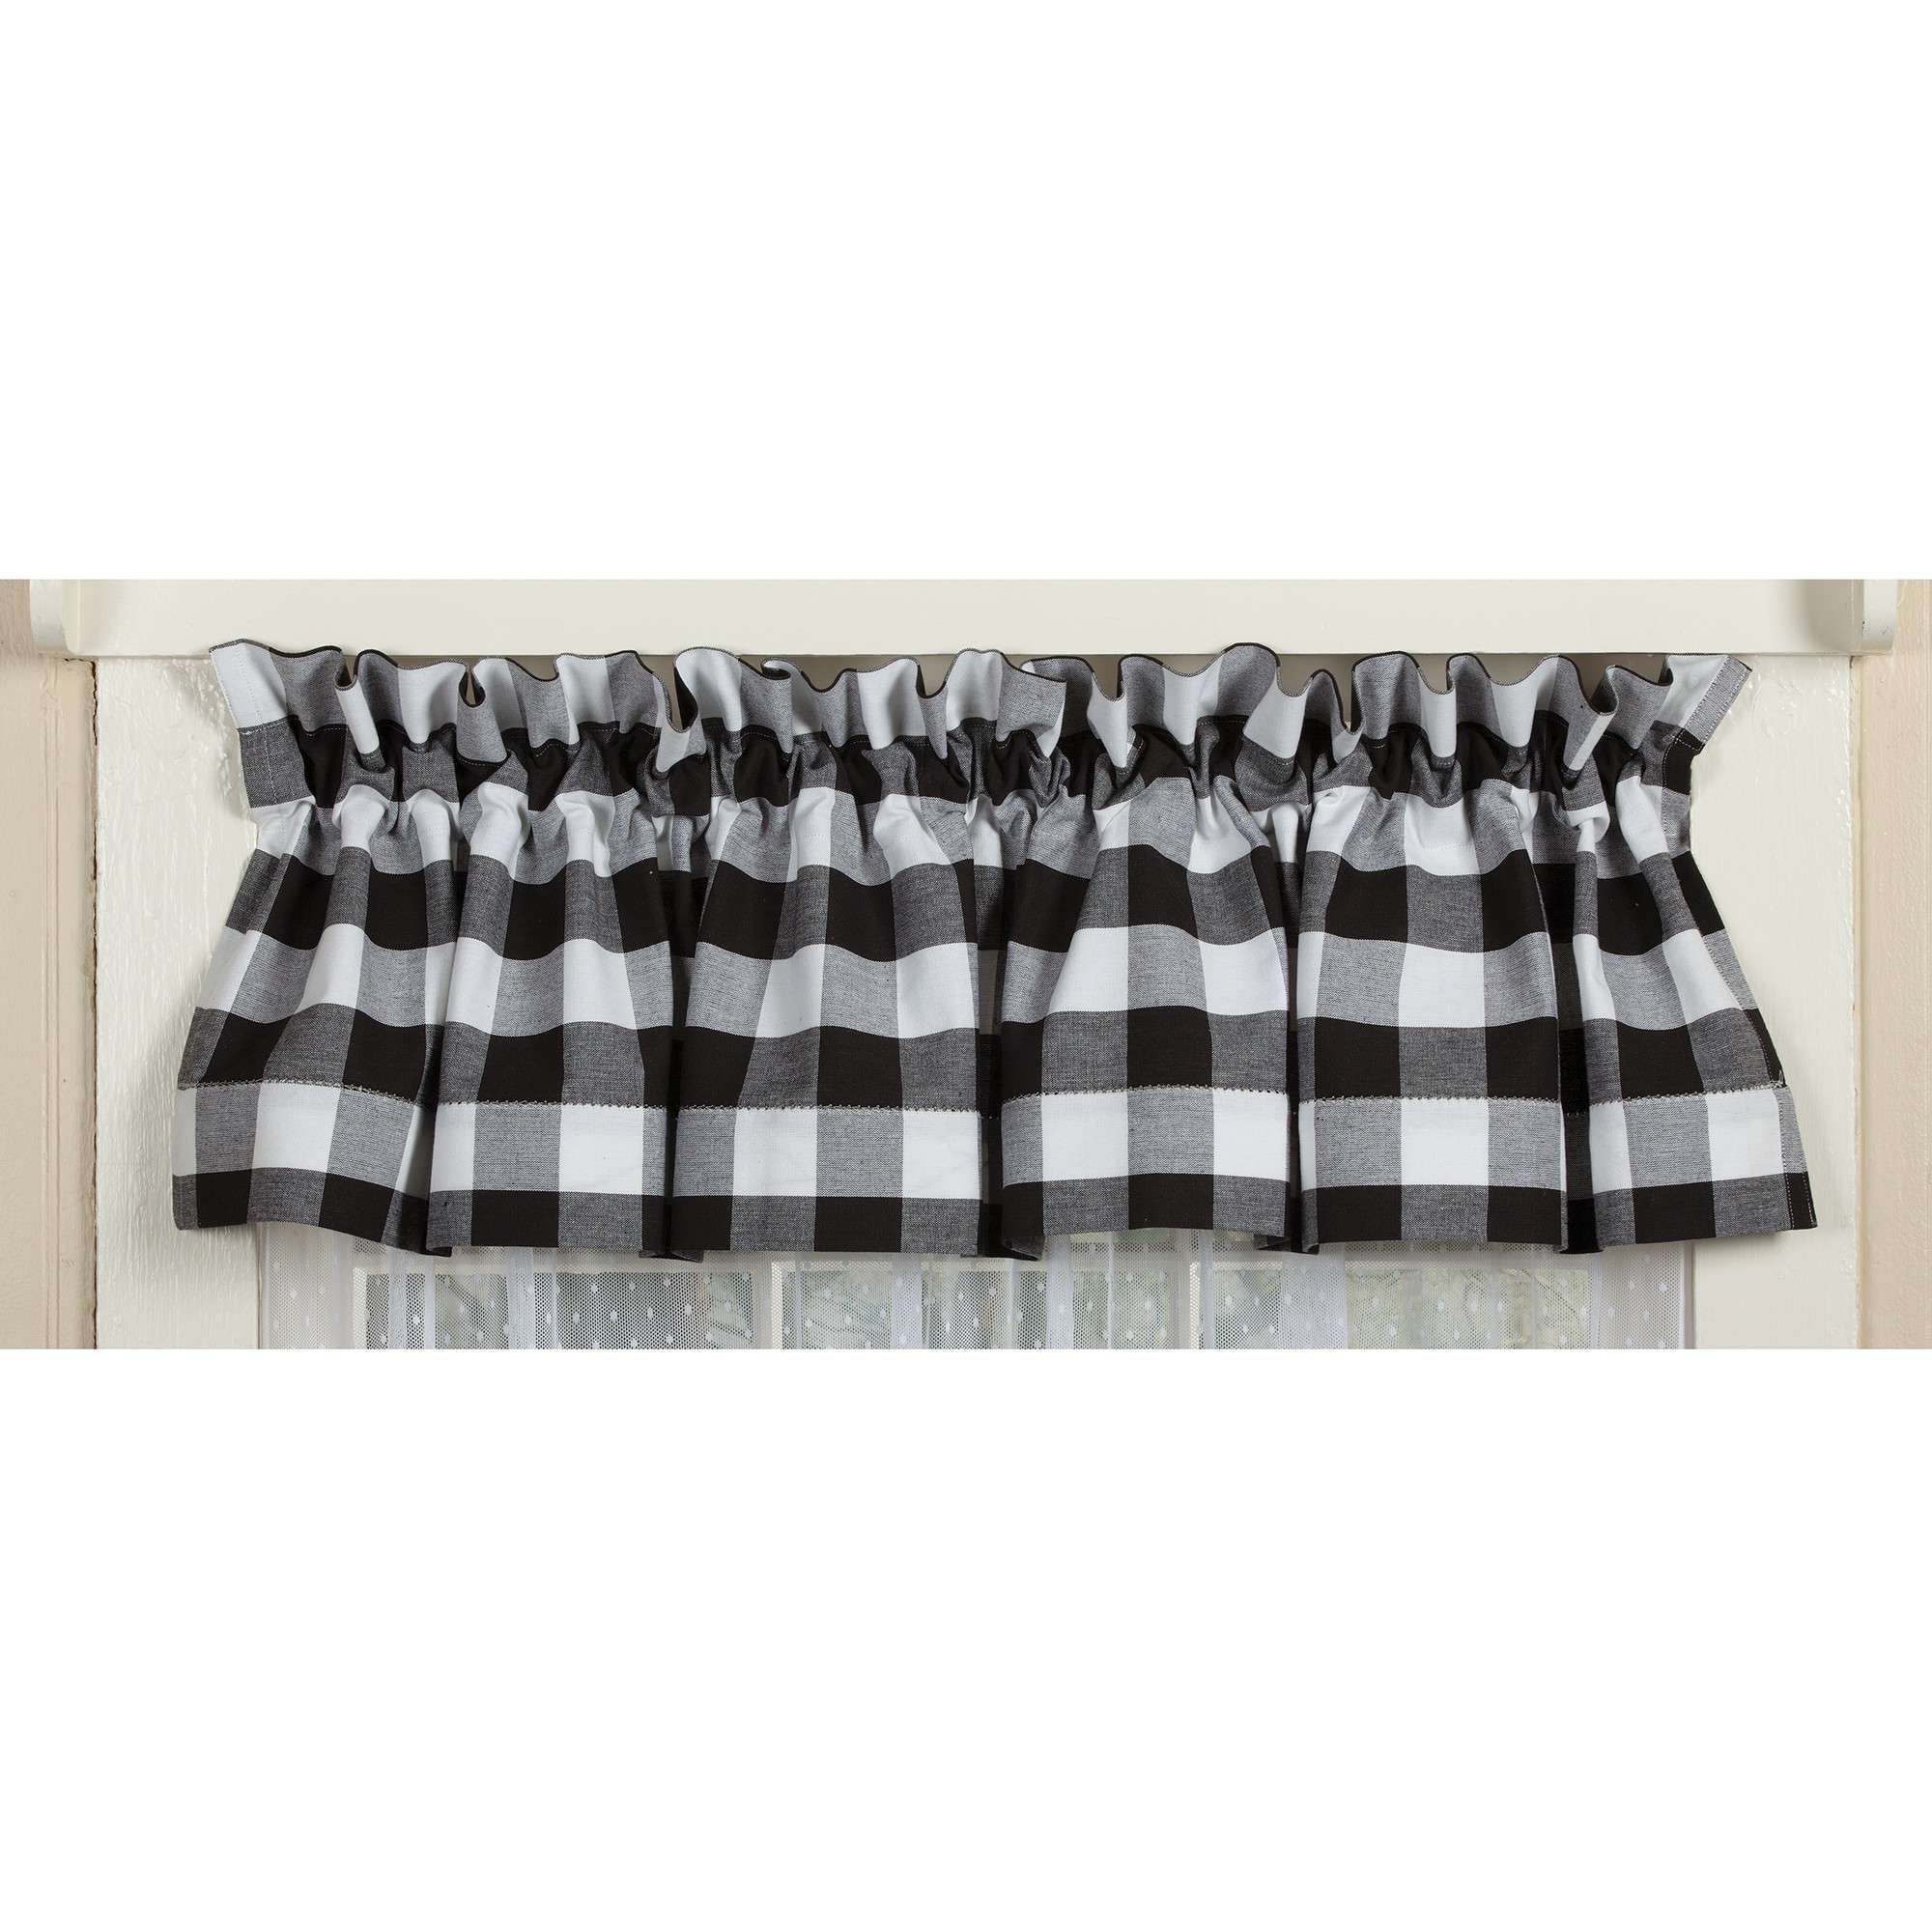 Well Liked Farmhouse Stripe Kitchen Tier Pairs Throughout Alluring Black And White Checkered Kitchen Valance Valances (View 10 of 20)